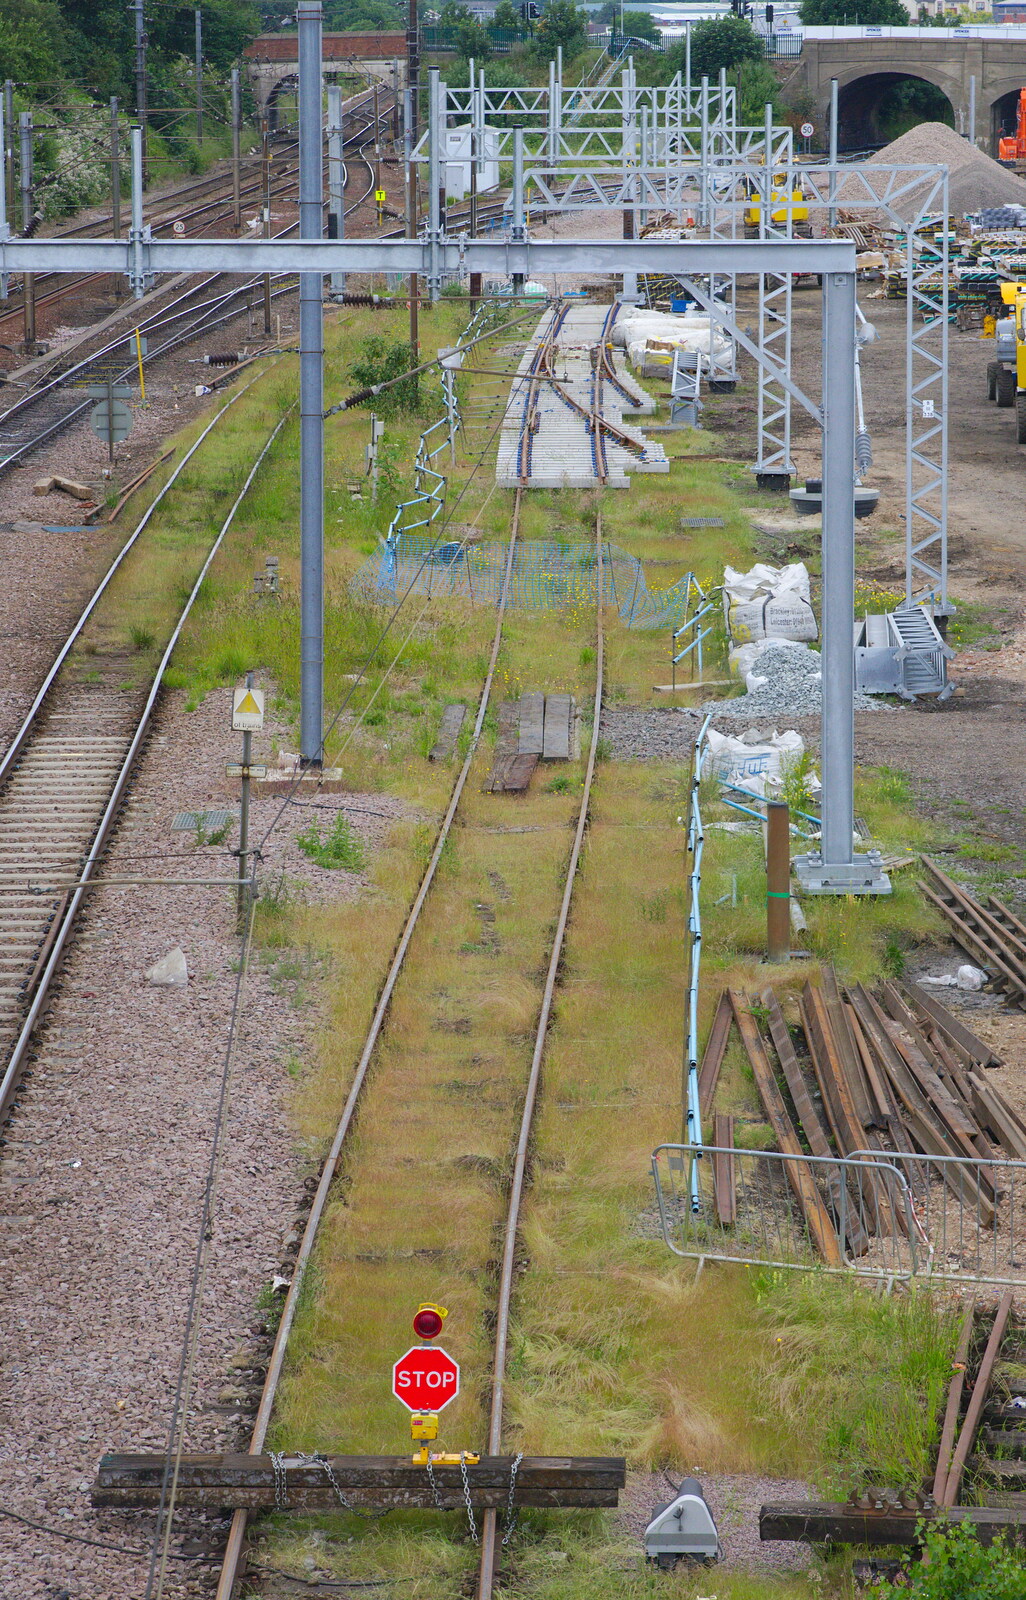 A railway line snakes off into the grass from Isobel's Race For Life, Chantry Park, Ipswich - 11th June 2014